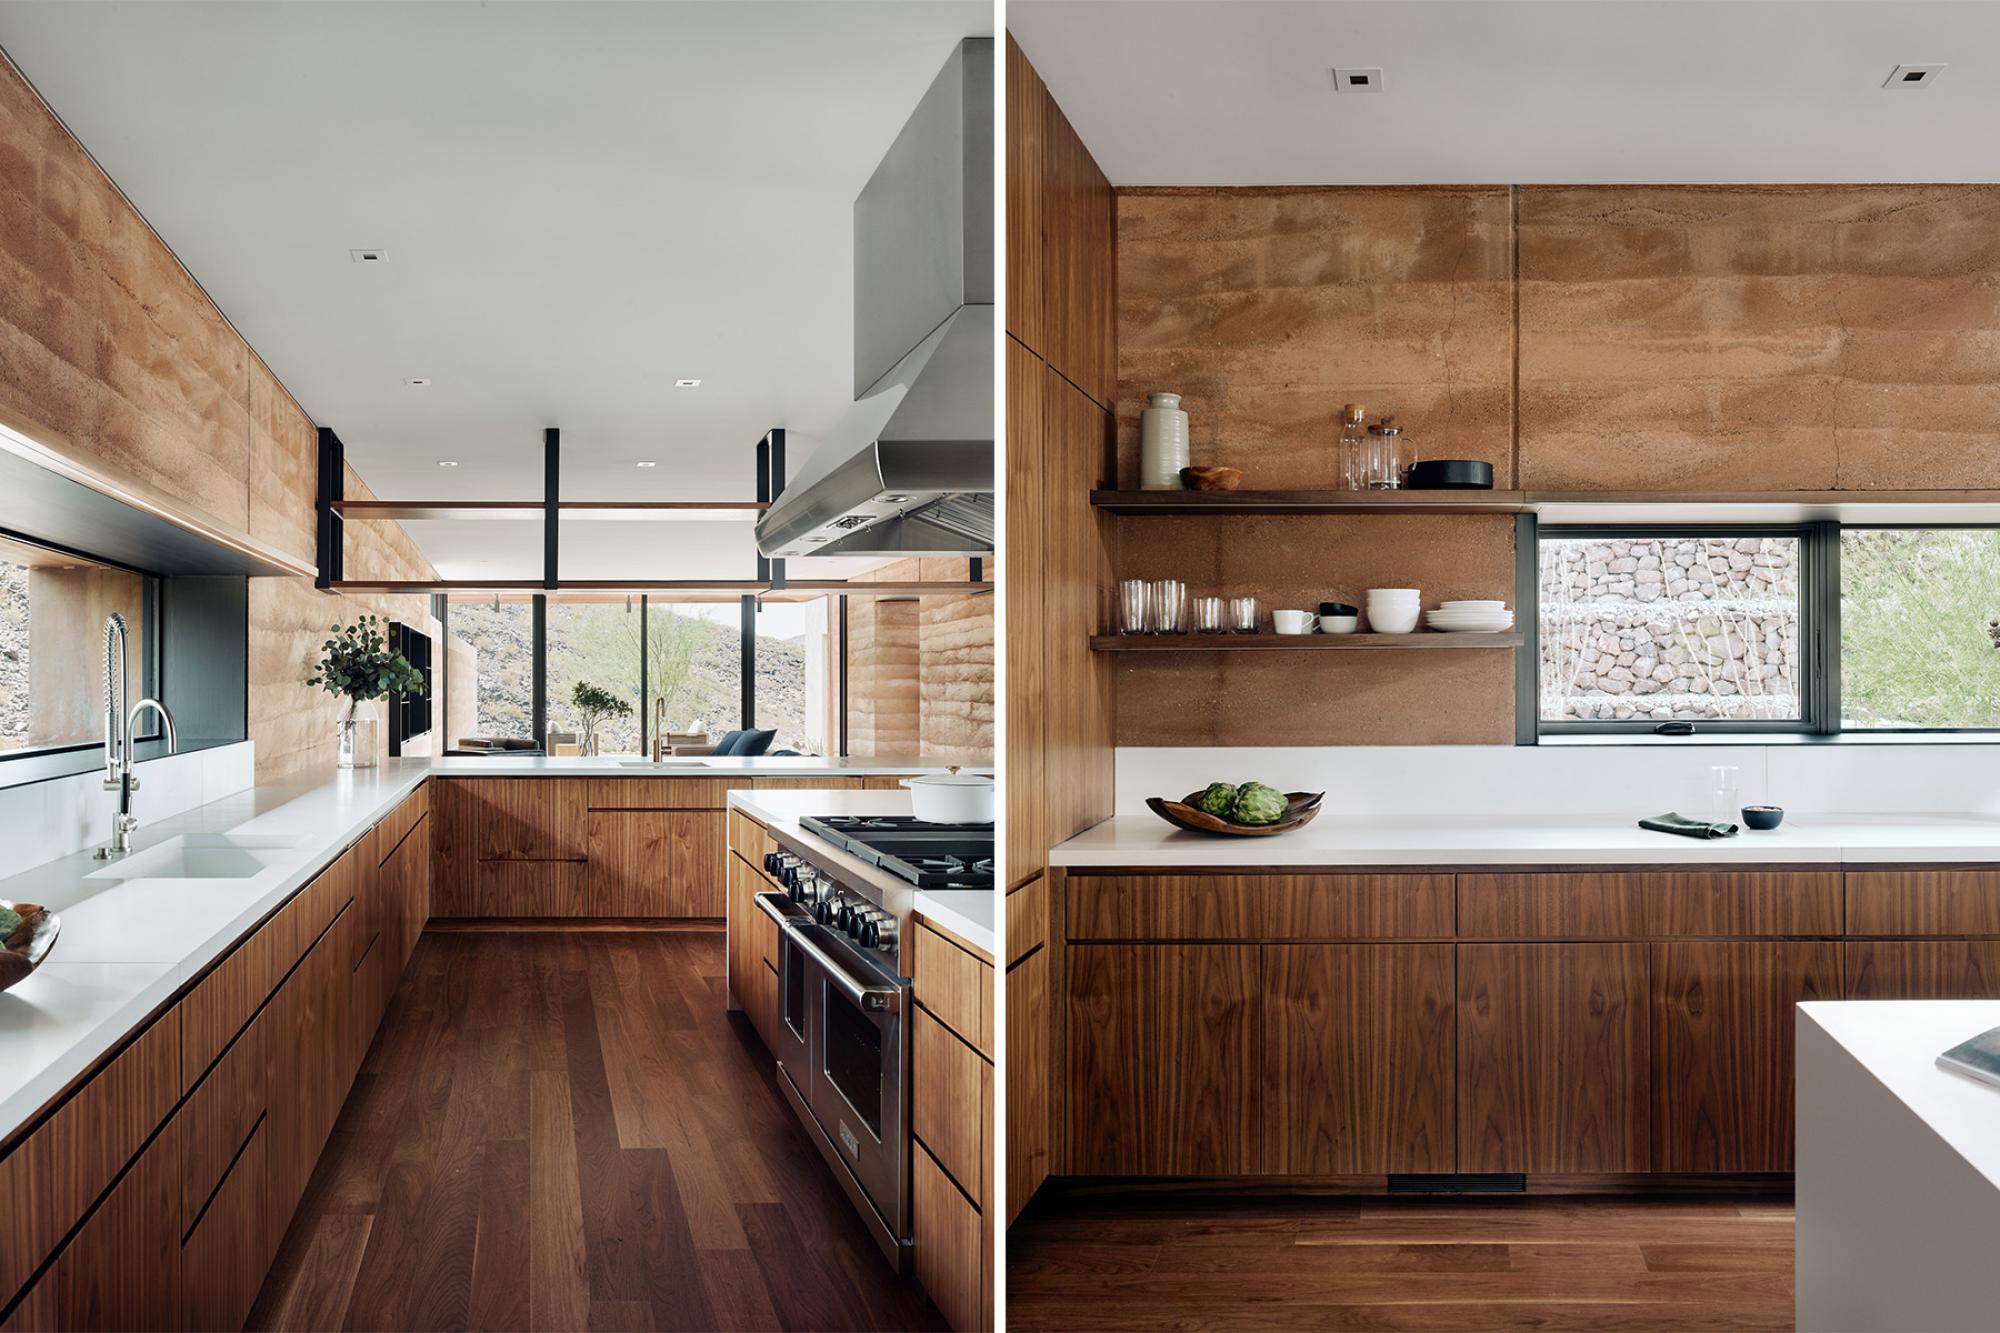 Interior kitchen views, boast of rammed earth walls, wood clad cabinetry and large windows with views to desert. 